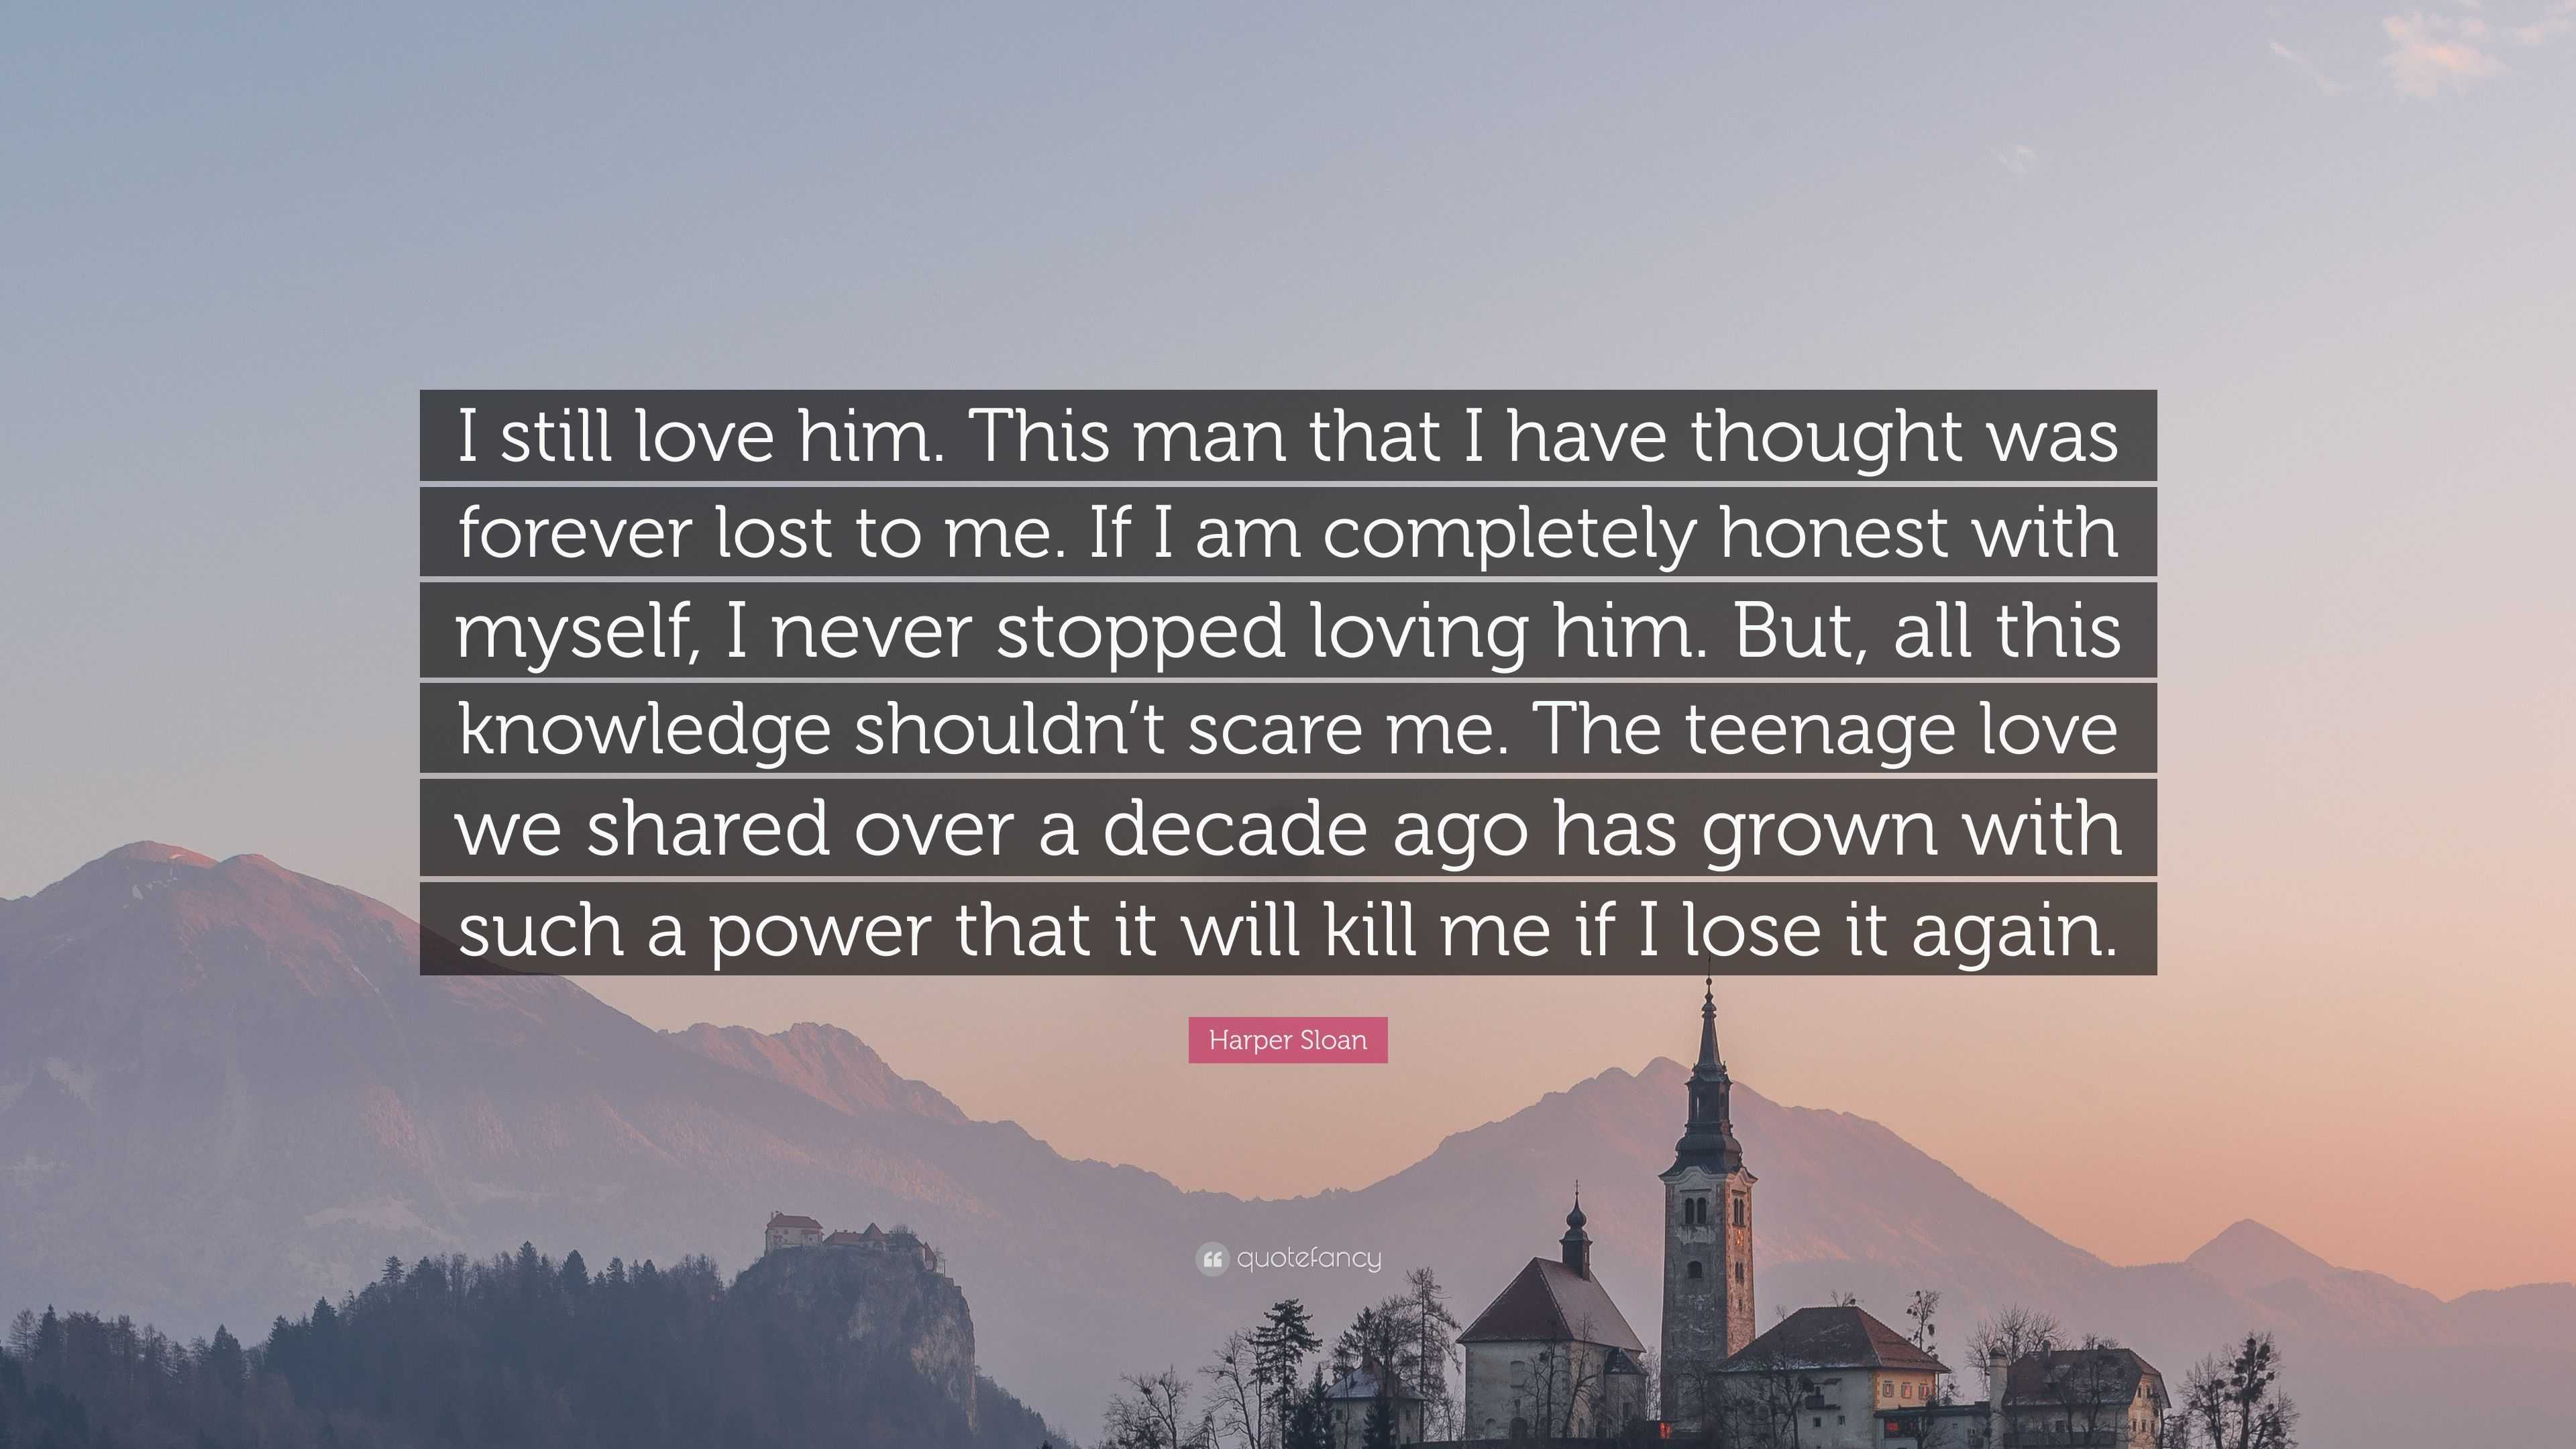 Harper Sloan Quote “I still love him This man that I have thought